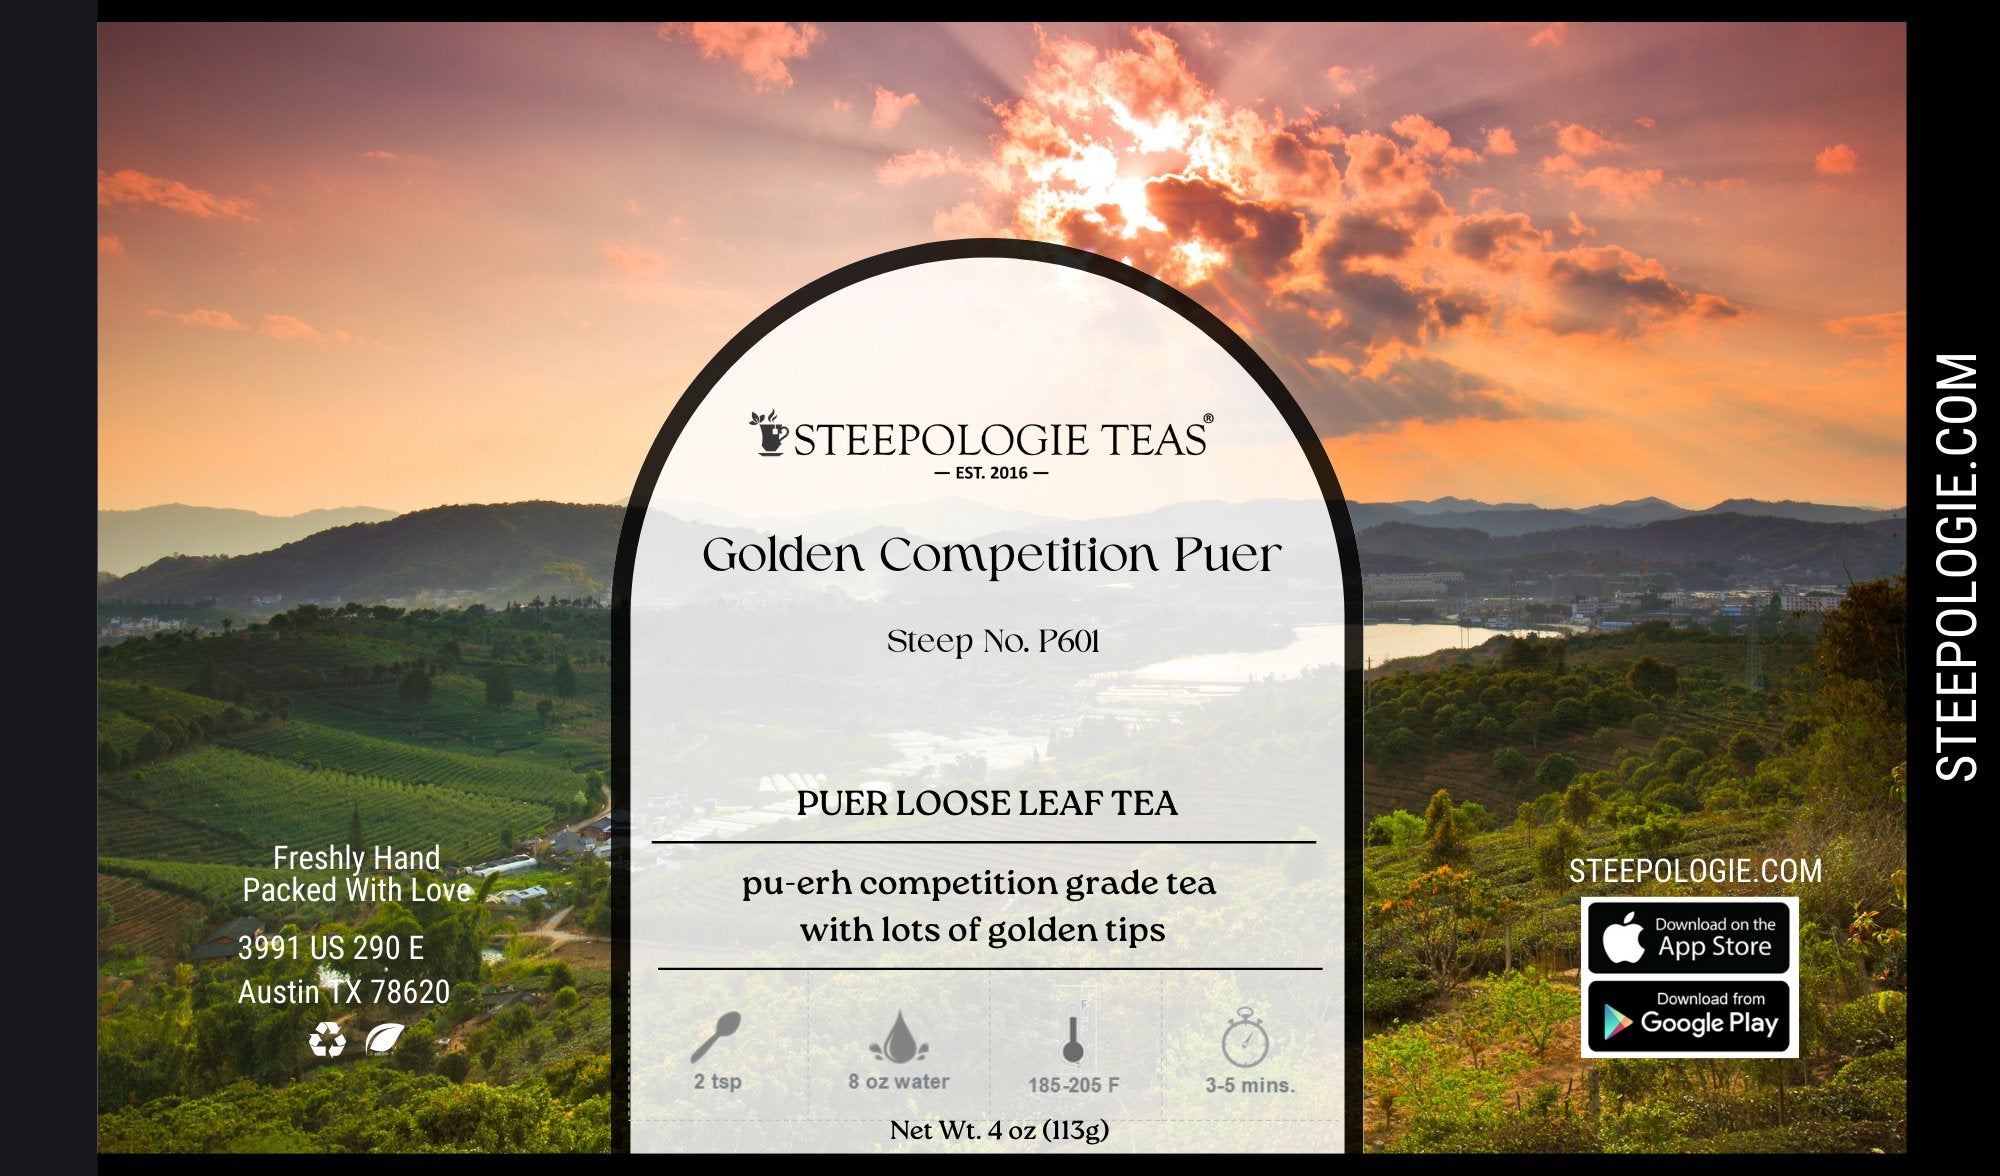 Golden Competition Puer (Steep No. P601) - Steepologie